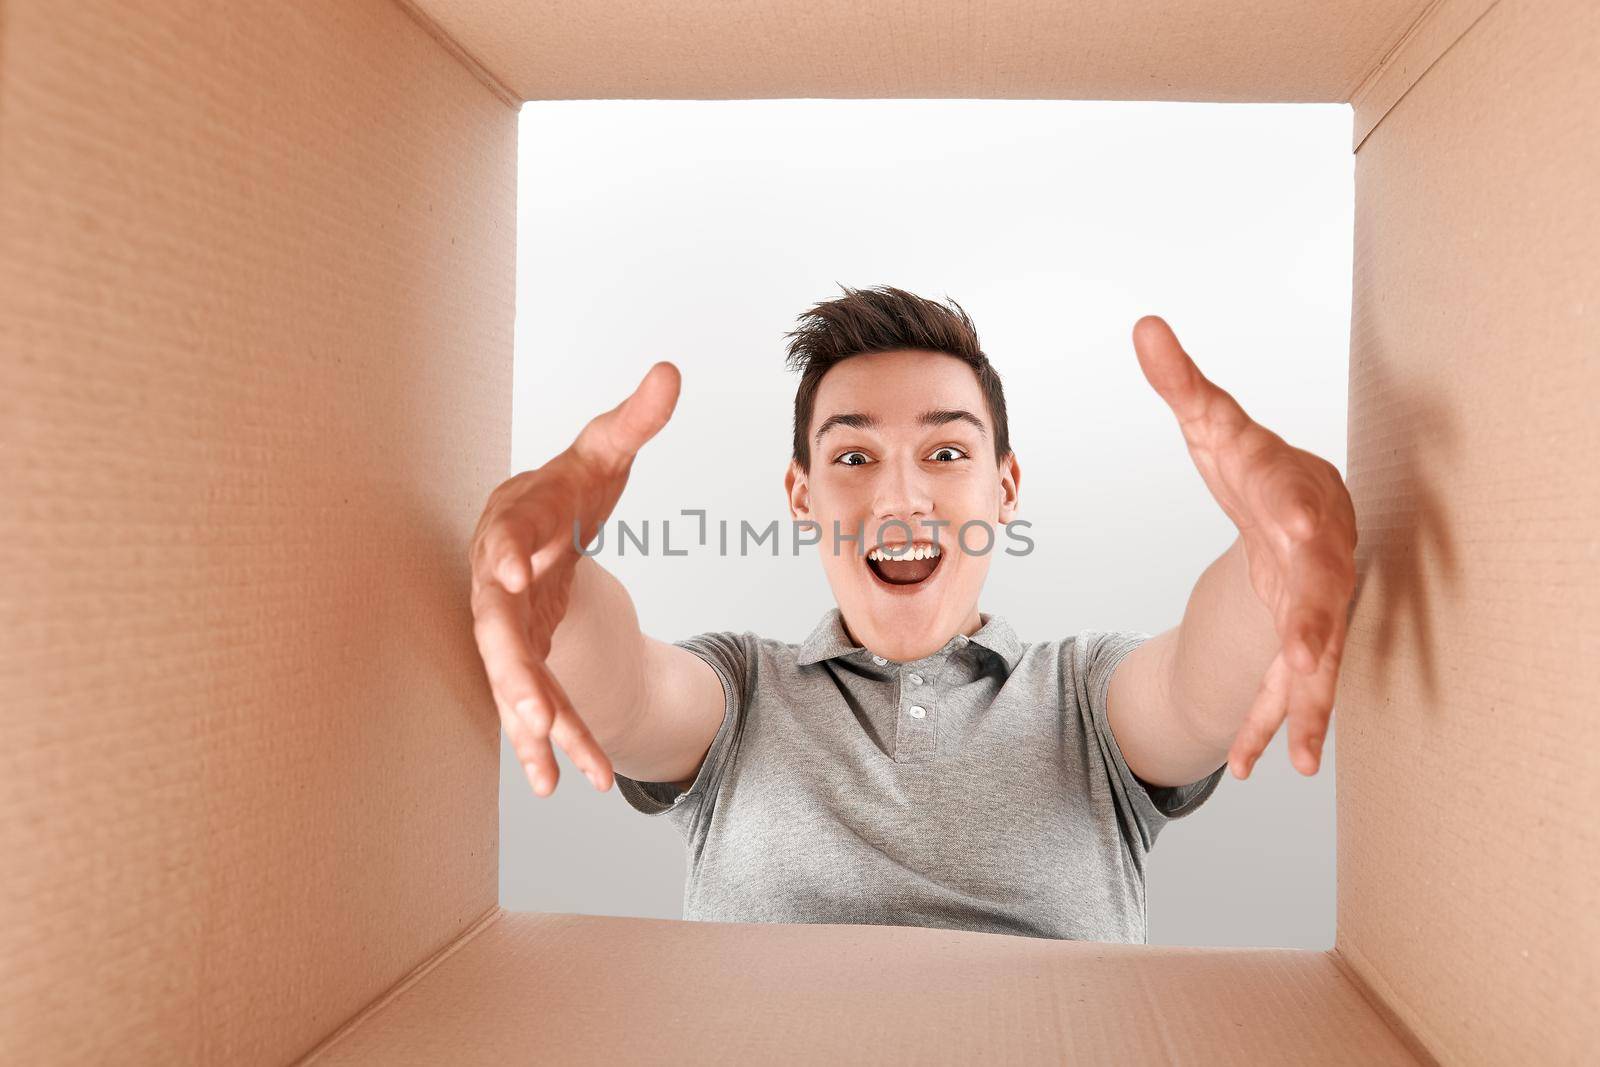 Cheerful boy wearing grey T-shirt unpacking, opening carton box. He stretches his arms forward to get a purchase out of the box. He is delighted with the speed of delivery of goods